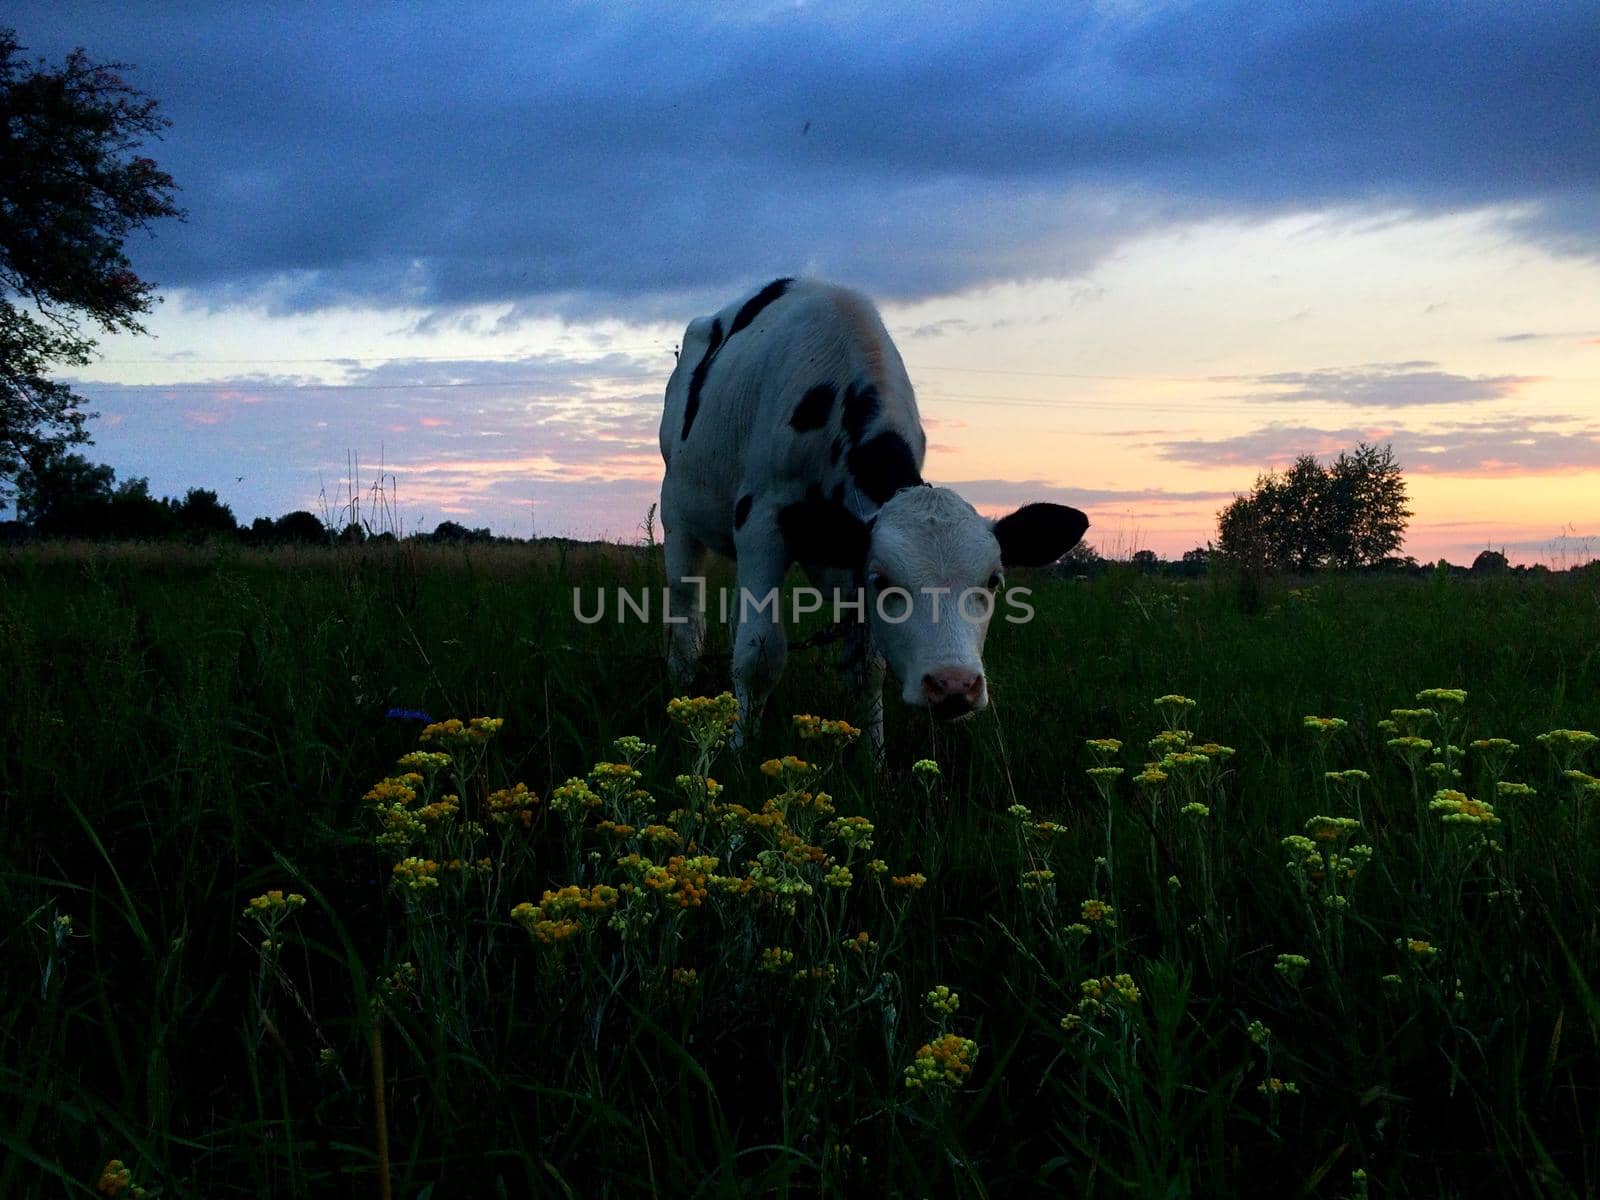 A baby cow calf in the middle of a field on sunset